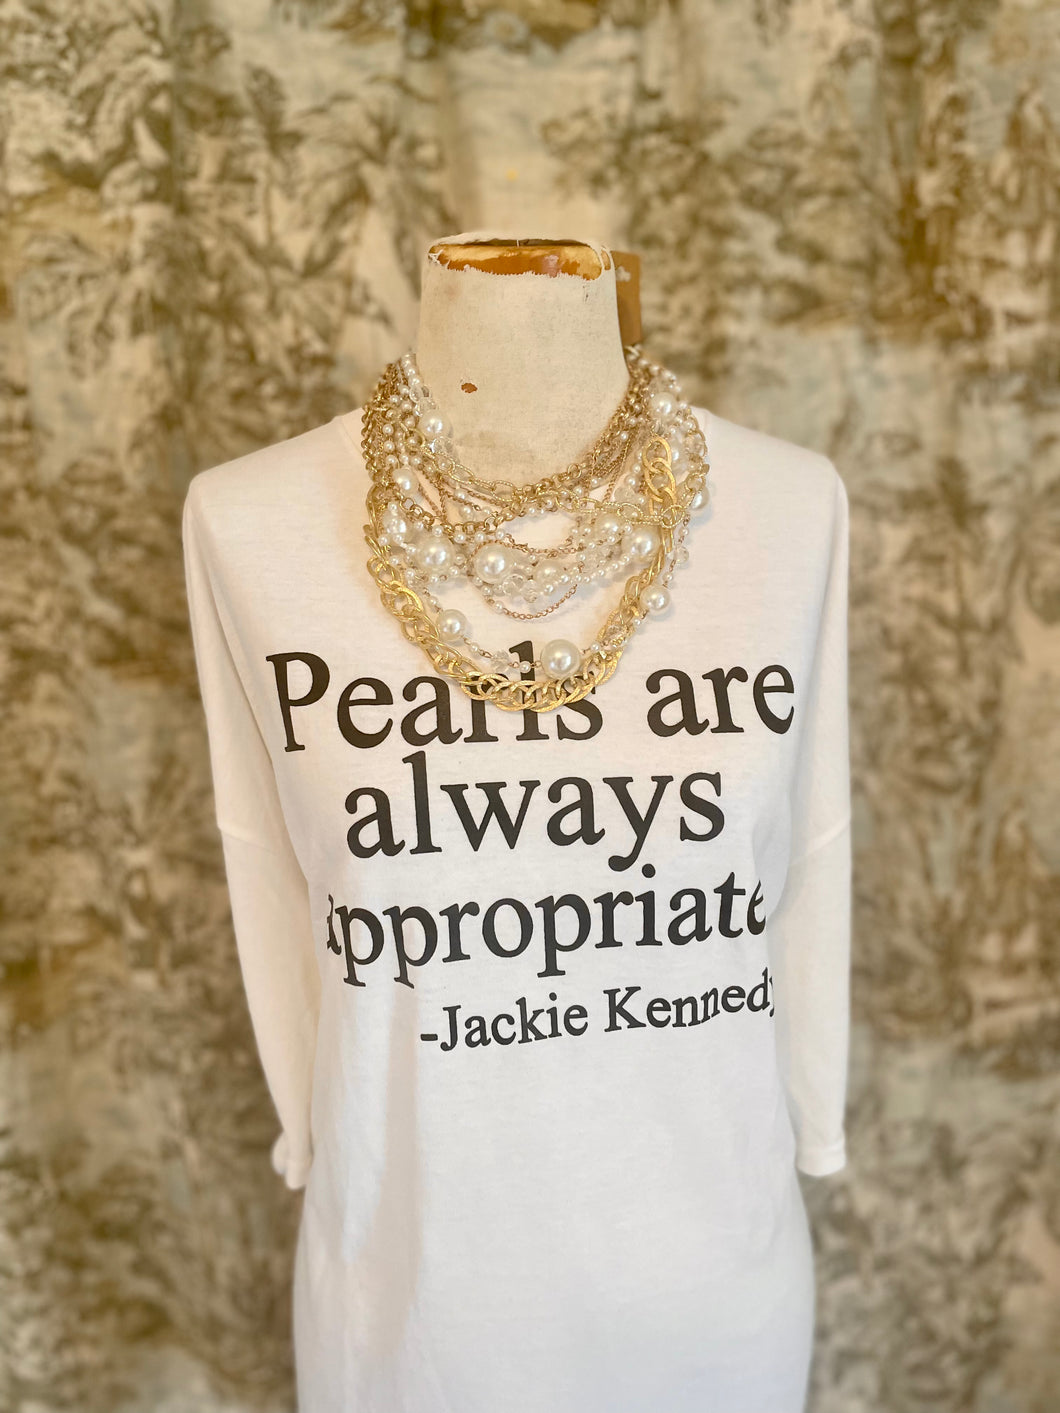 Pearls and Gold Chains necklace